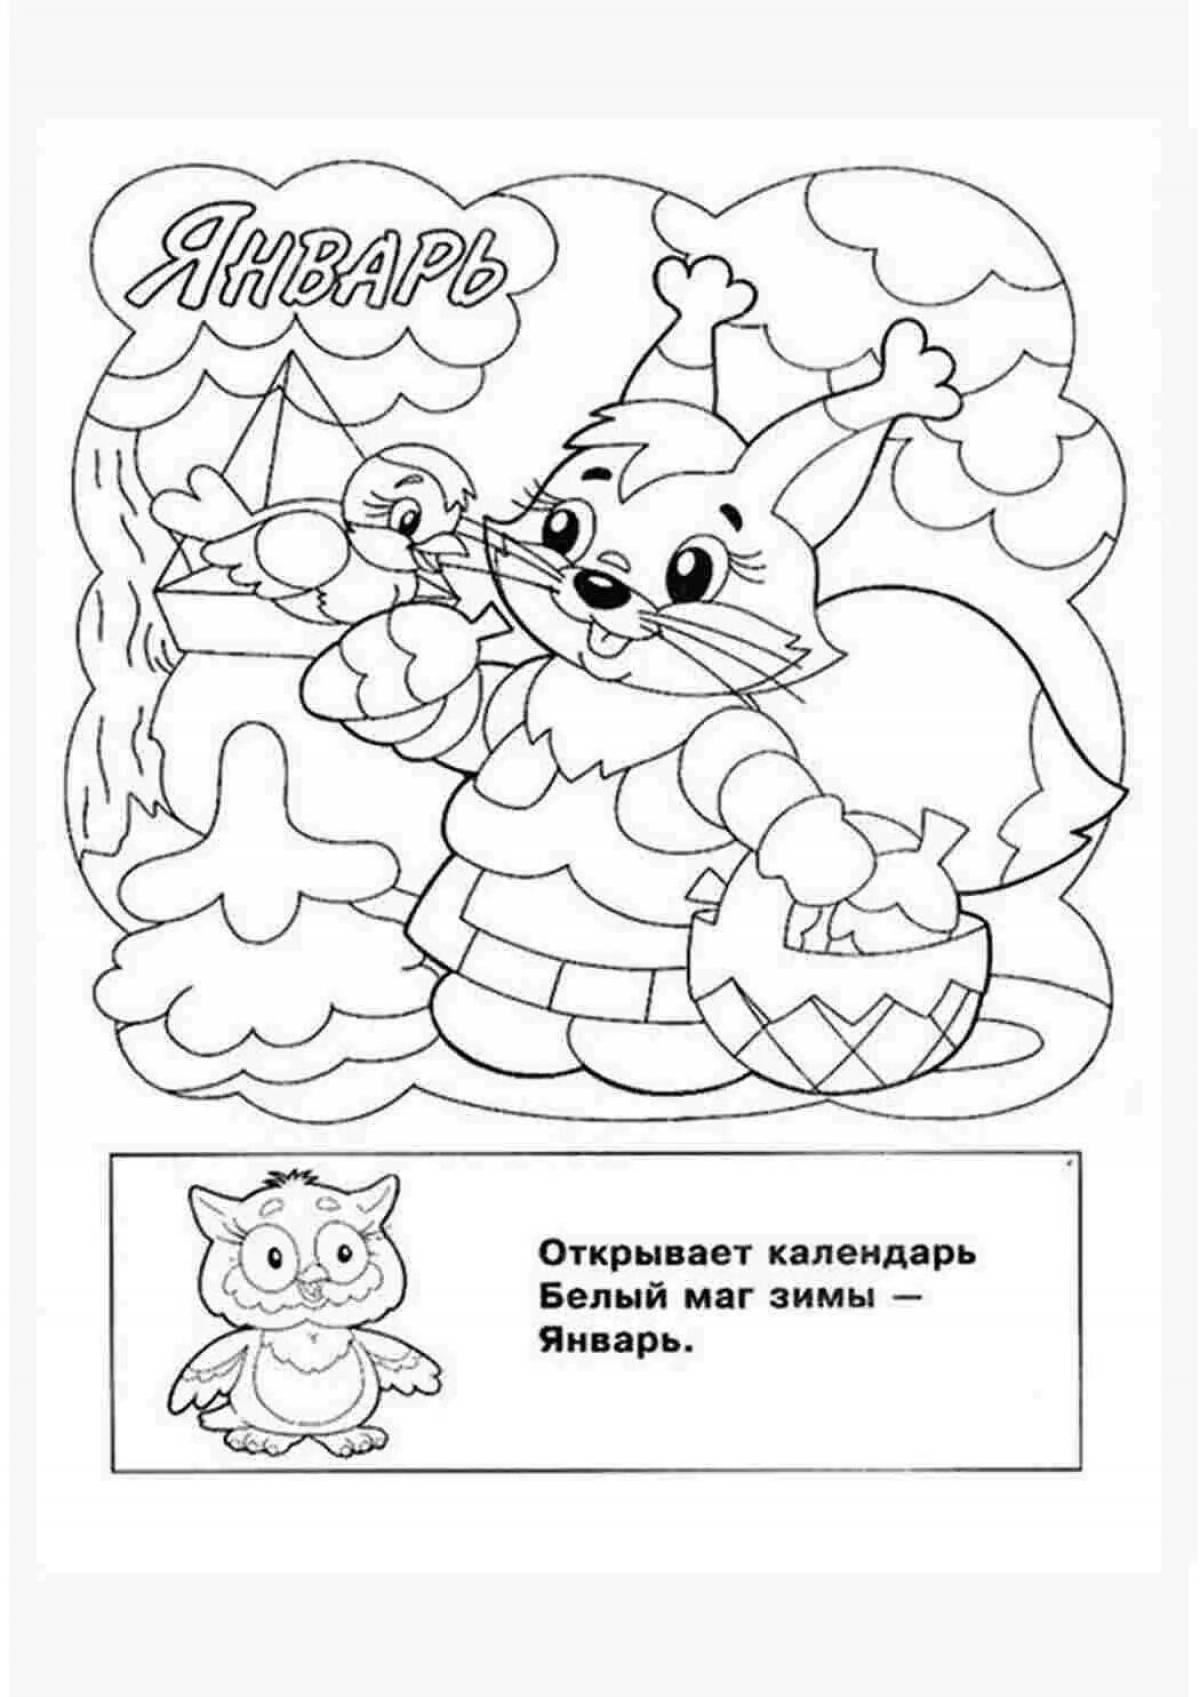 Colorful coloring pages of the months of the year for children